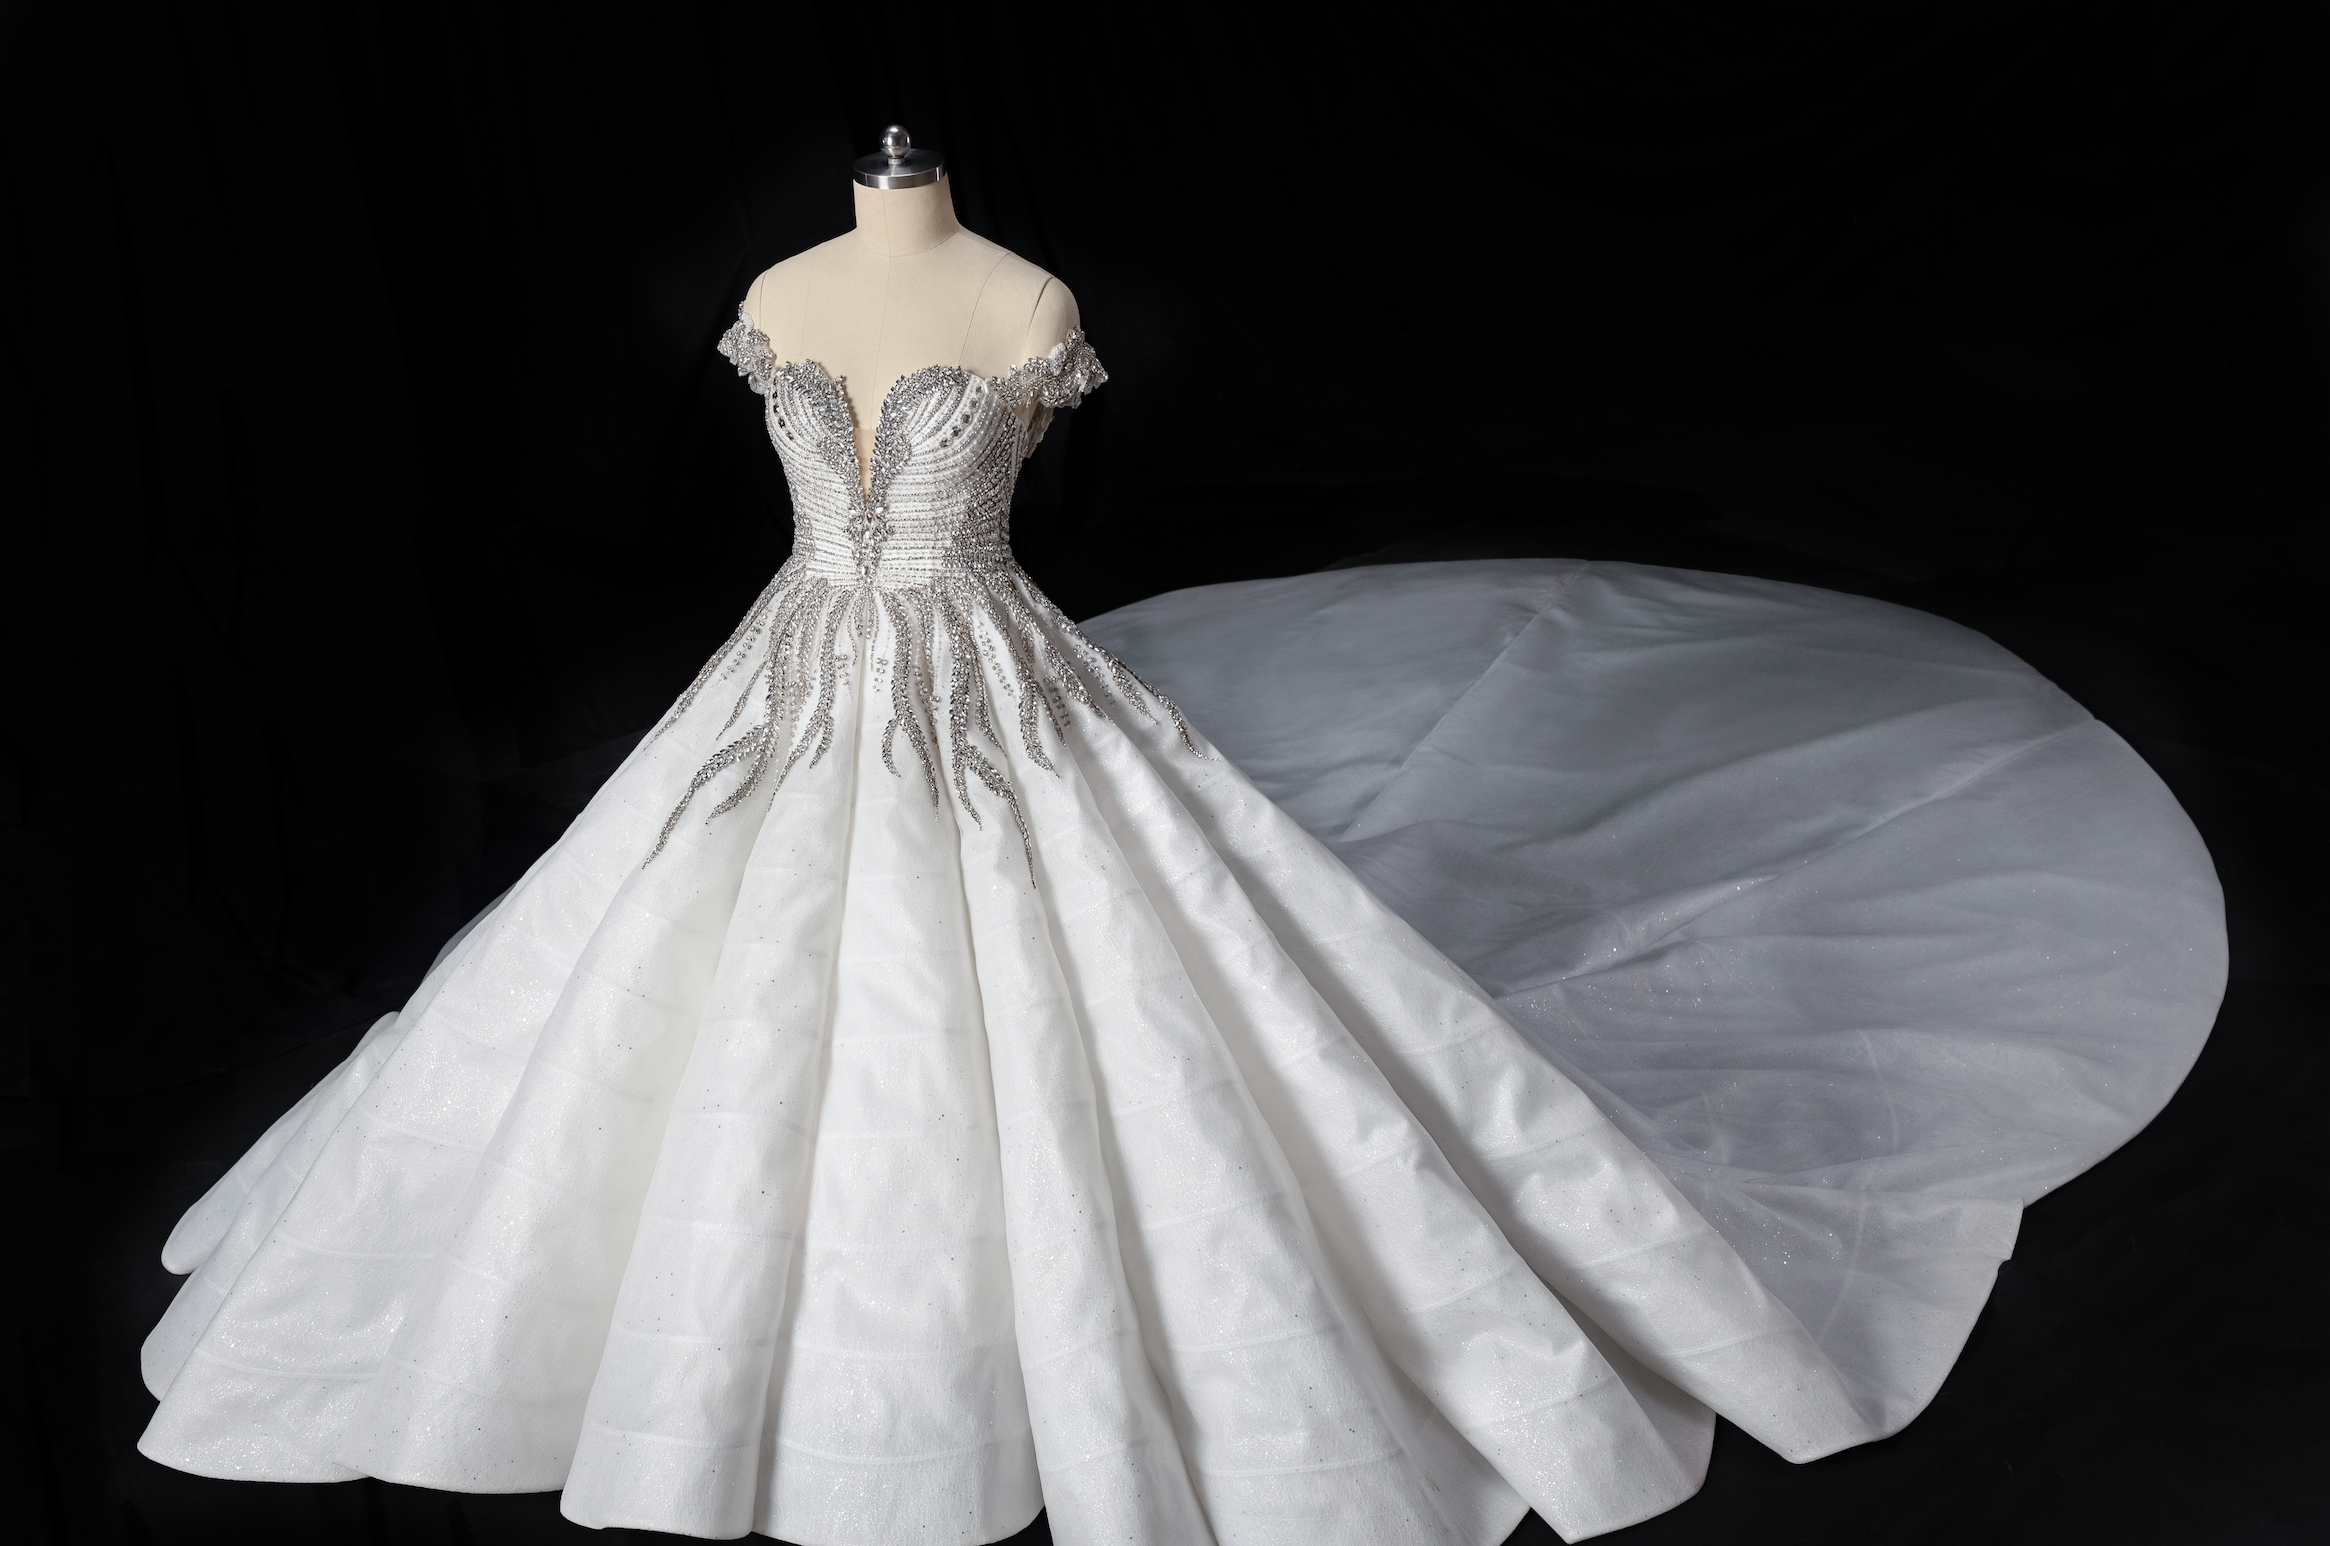 Haute Couture Ball Gown Wedding Dress with Swarovski Crystals (#SHARMAINE)